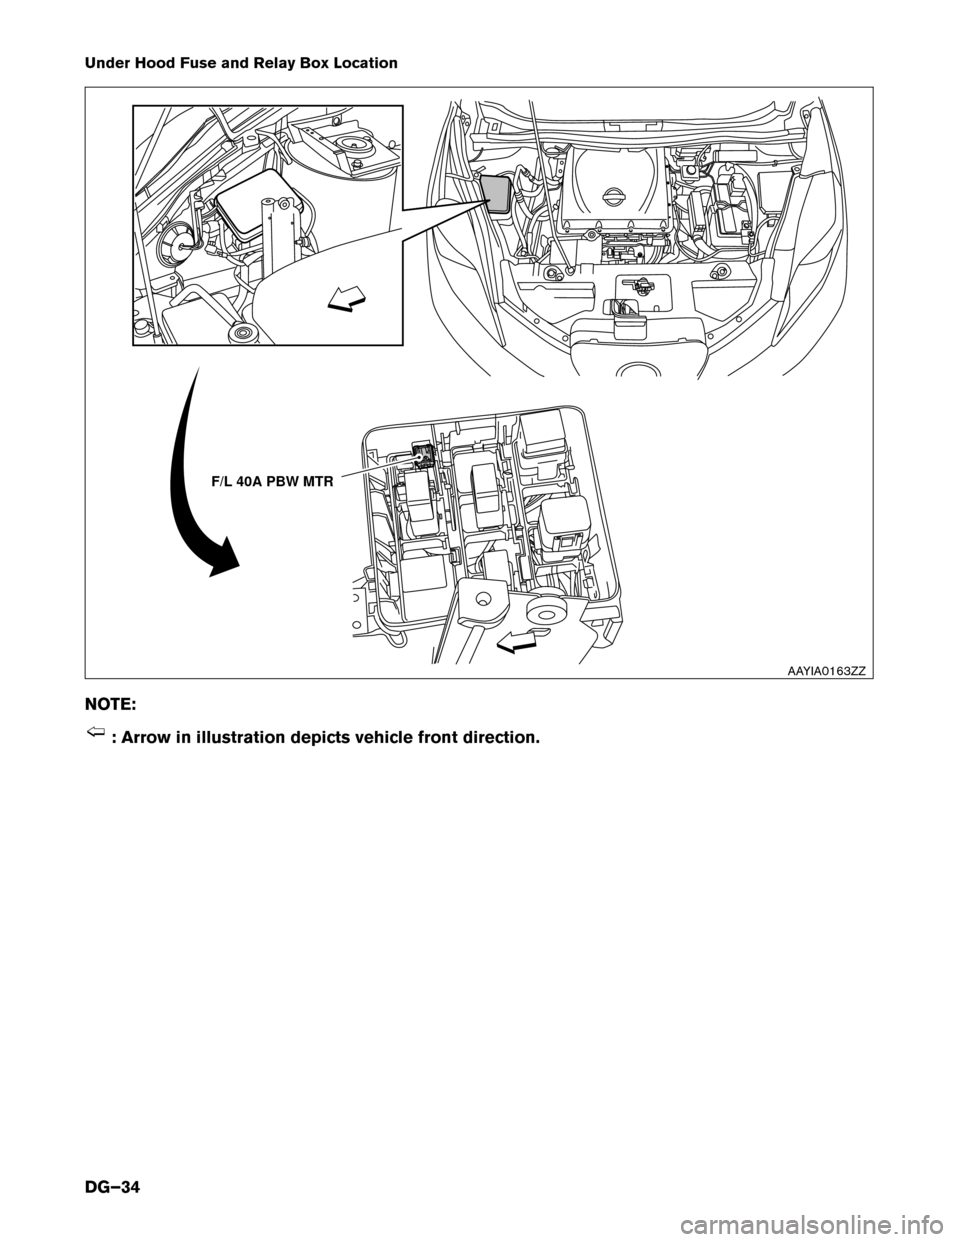 NISSAN LEAF 2014 1.G Dismantling Guide Under Hood Fuse and Relay Box Location
NO
TE: : Arrow in illustration depicts vehicle front direction. F/L 40A PBW MTR
AAYIA0163ZZ
DG–34 